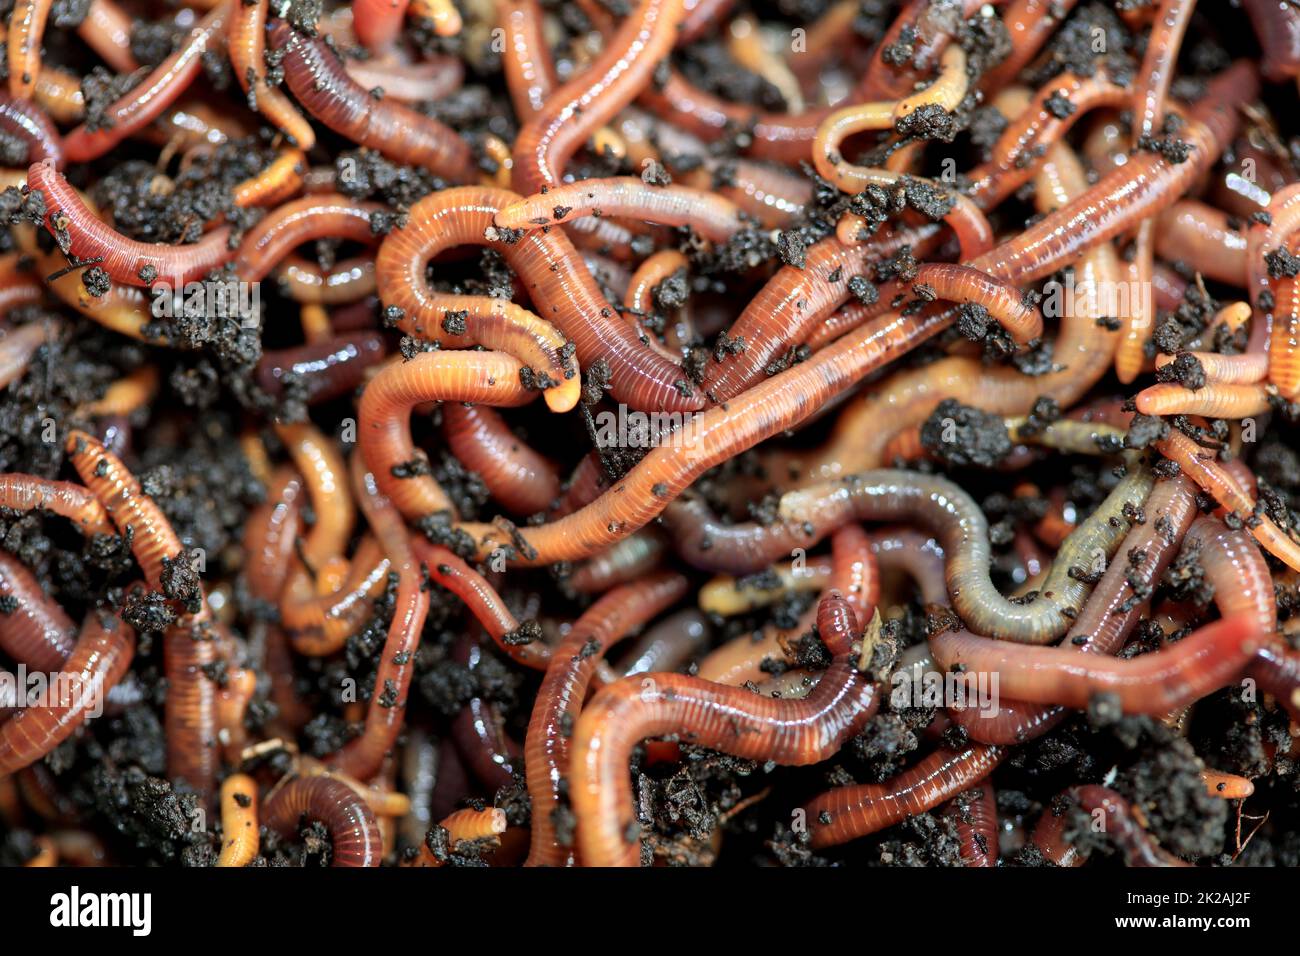 Earthworms for Fishing or Compost Stock Photo